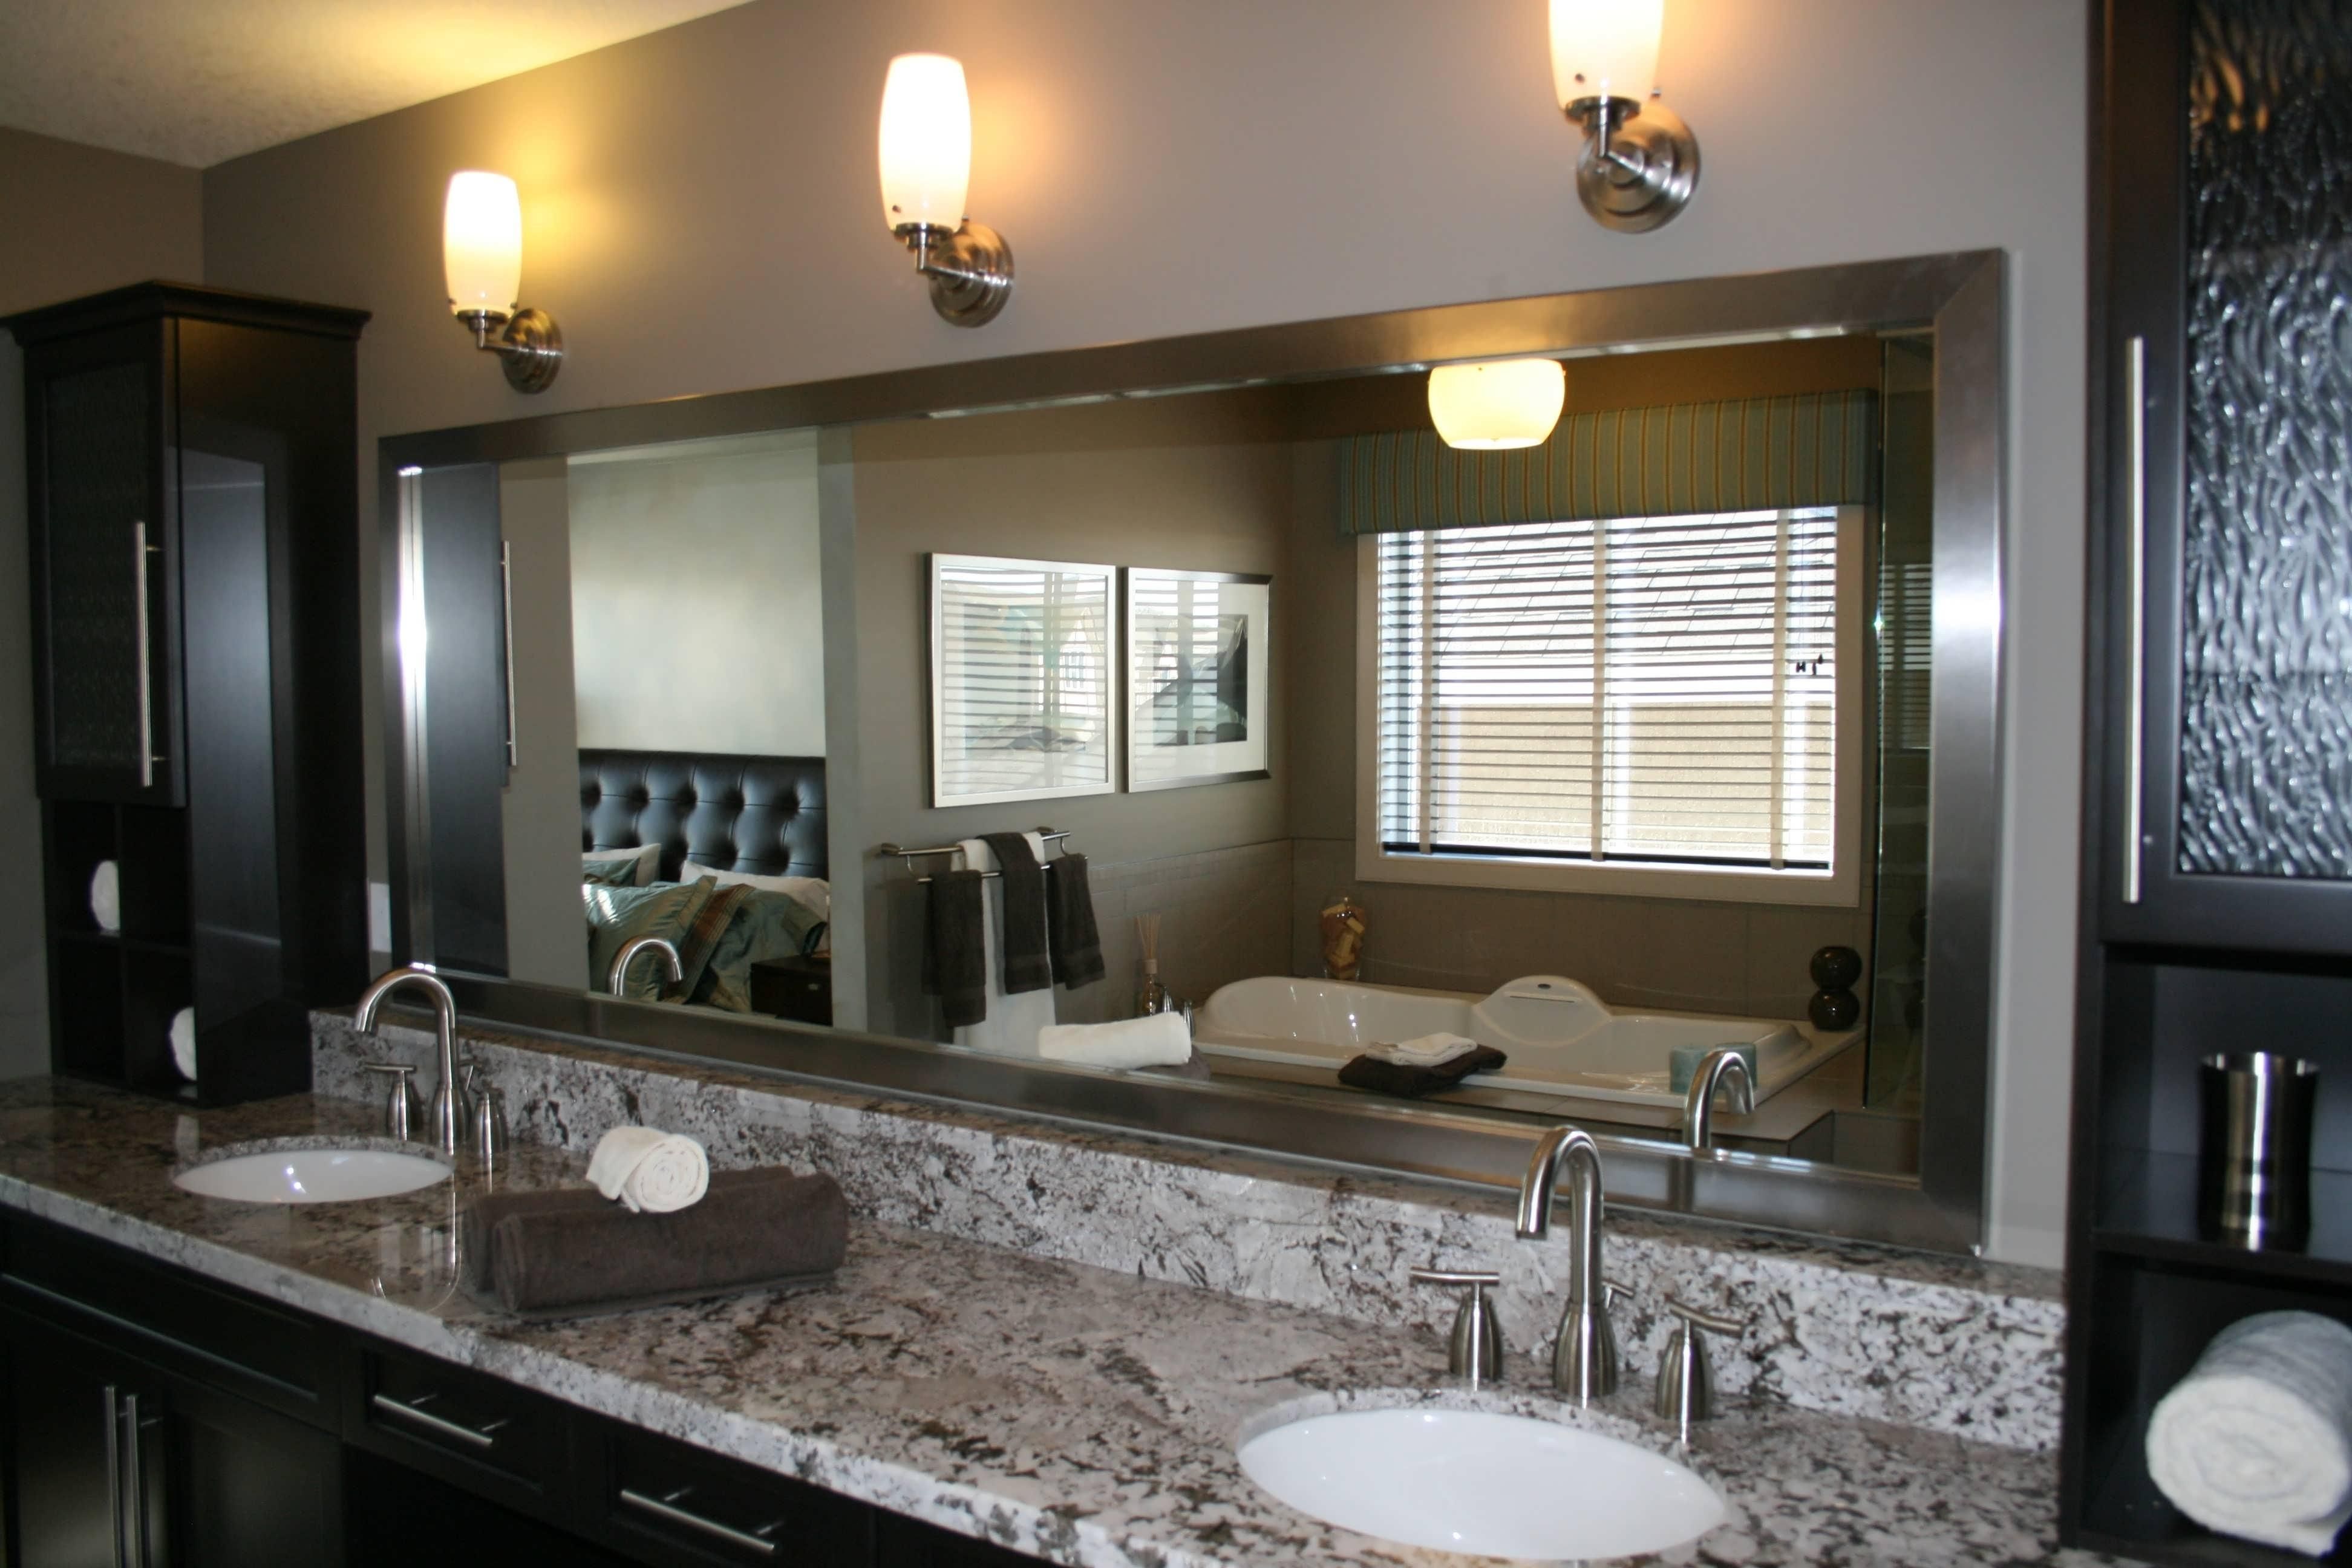 Bathroom : Mirror Shop Large Framed Wall Mirrors Looking Mirror Pertaining To Large Mirrors For Bathroom Walls (View 19 of 20)